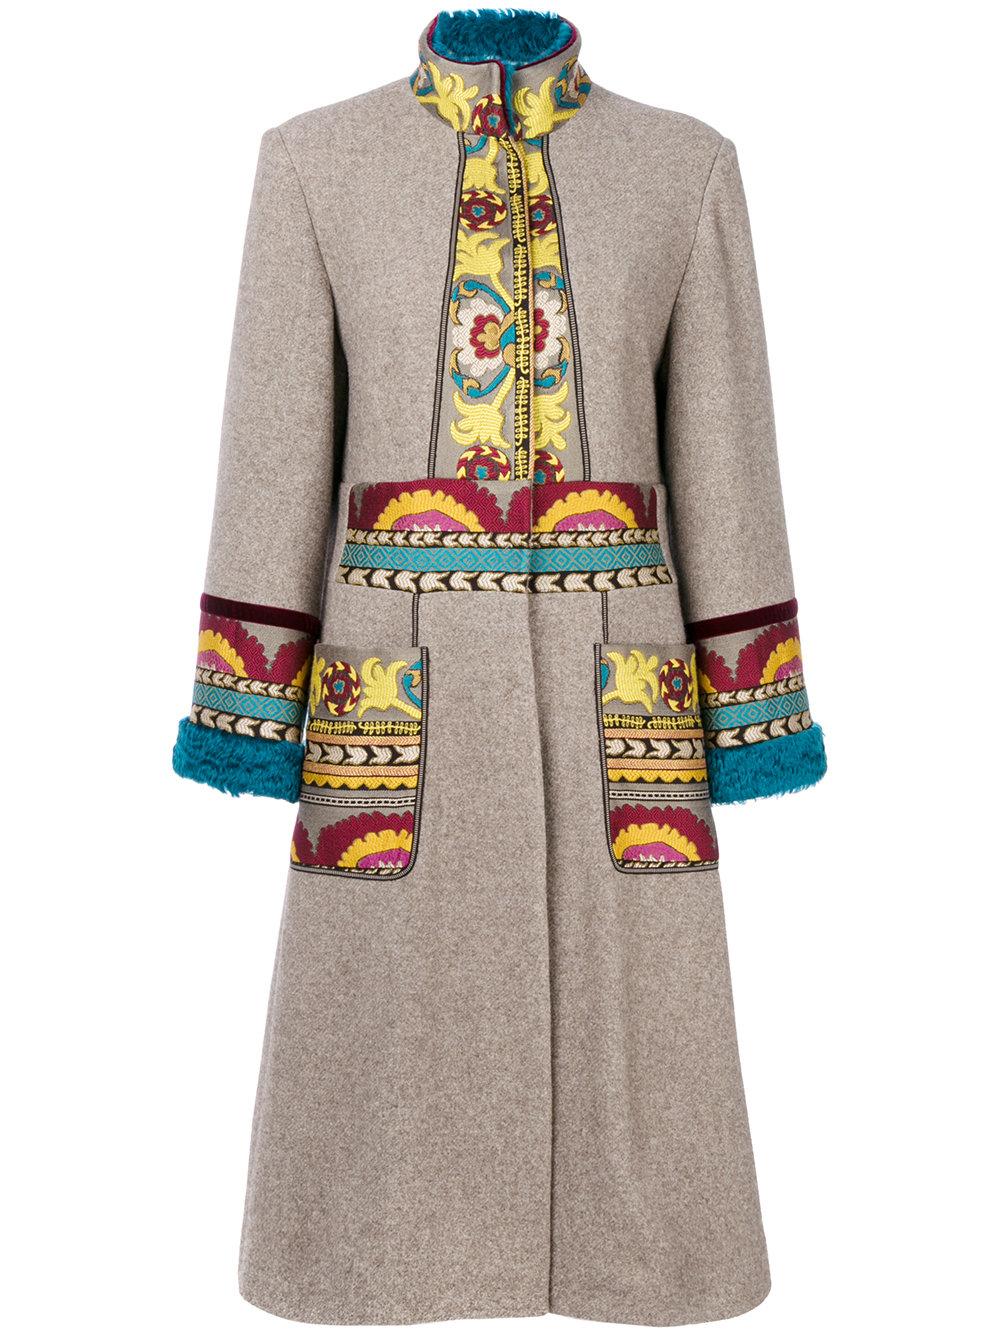 Lyst - Etro Embroidered Cardi-coat in Natural